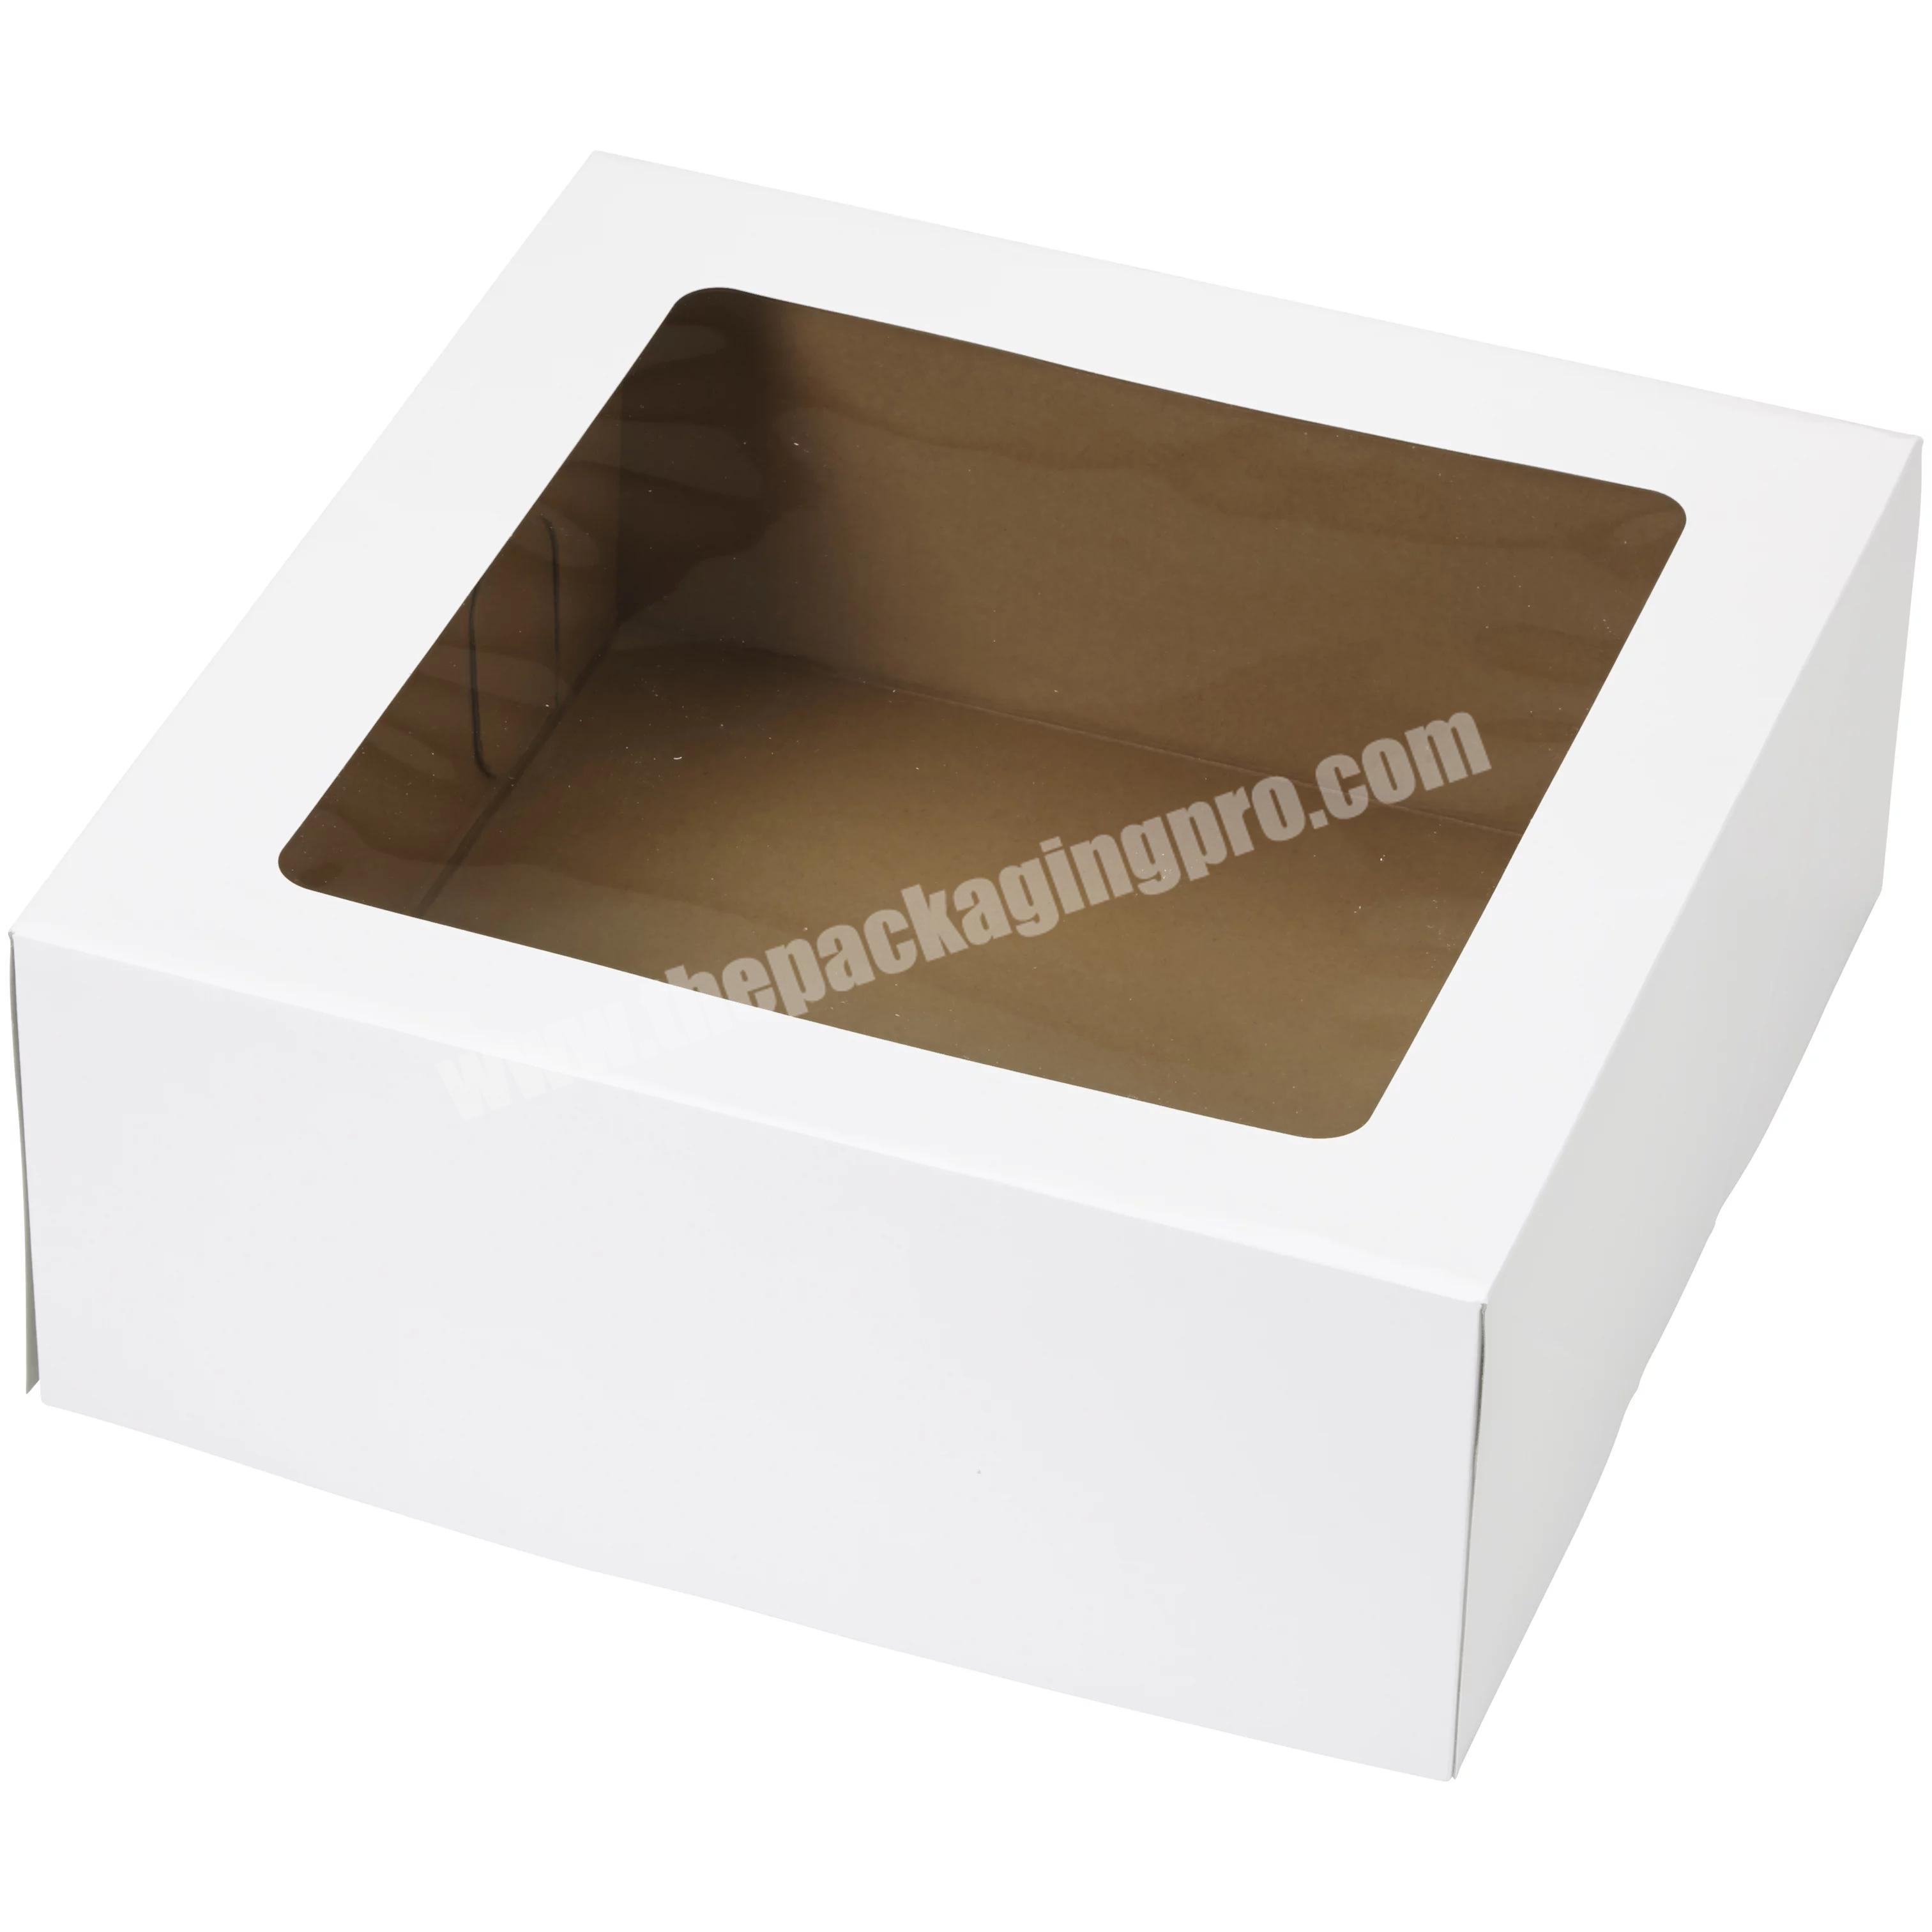 KINSUN Custom White Bakery Wedding Cake boxes 10x10x5 Inch with Window and Gold Round Cake Boards for Birthday Party